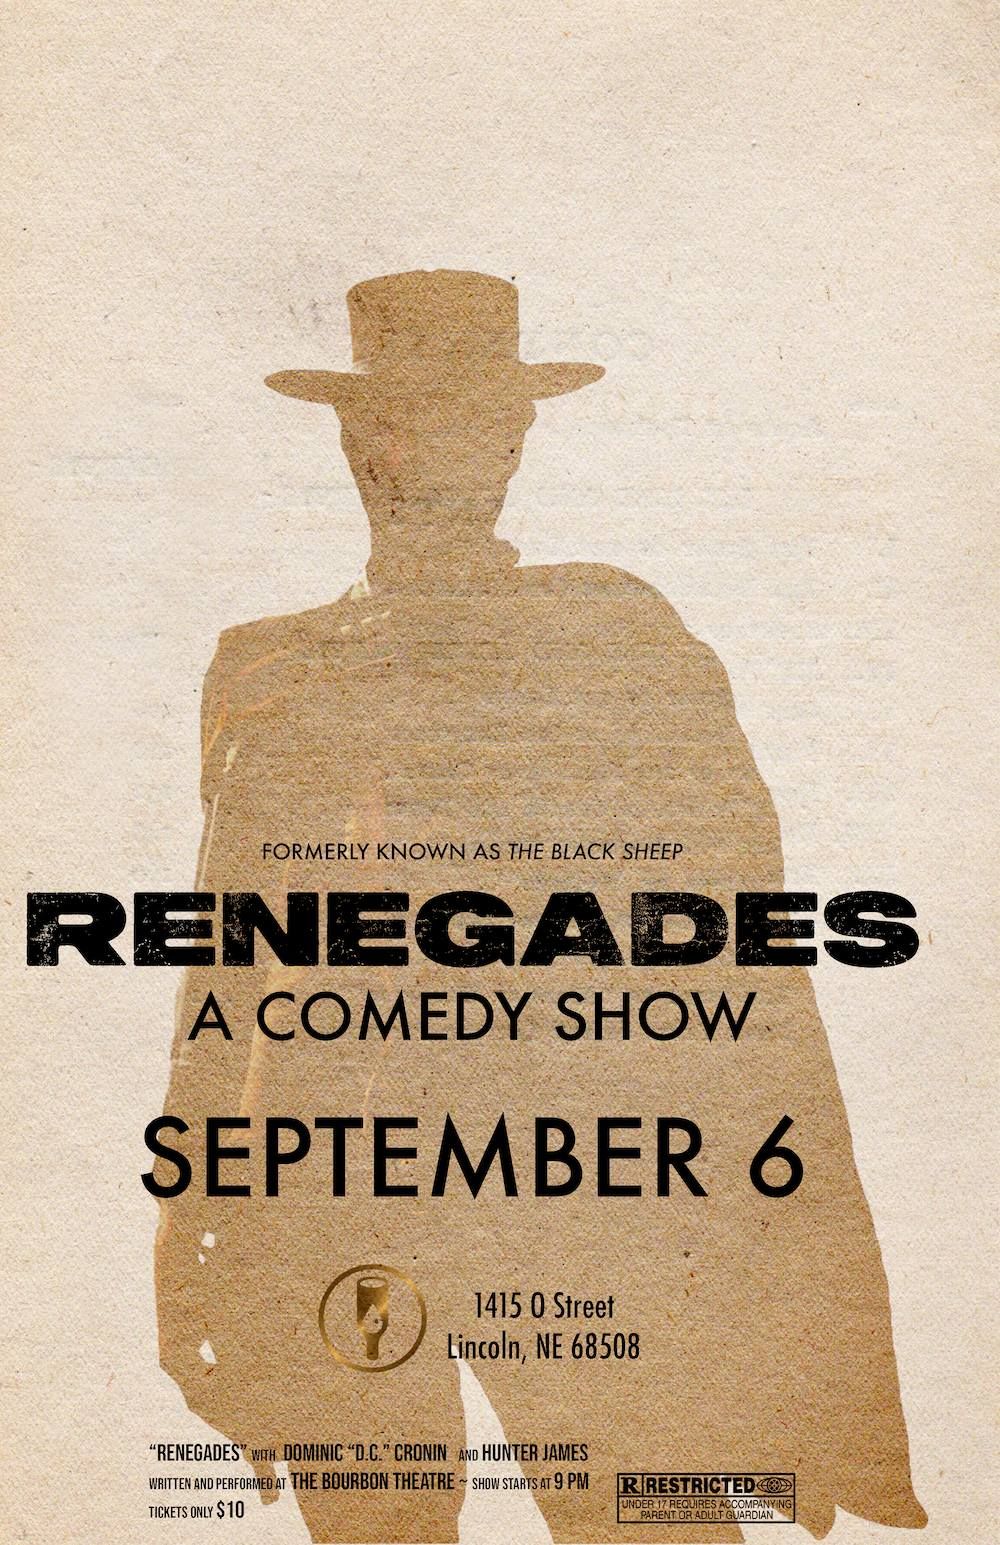 RENEGADES: A Comedy Show w\/ Dominic "D.C." Cronin and Hunter James at Bourbon Theatre